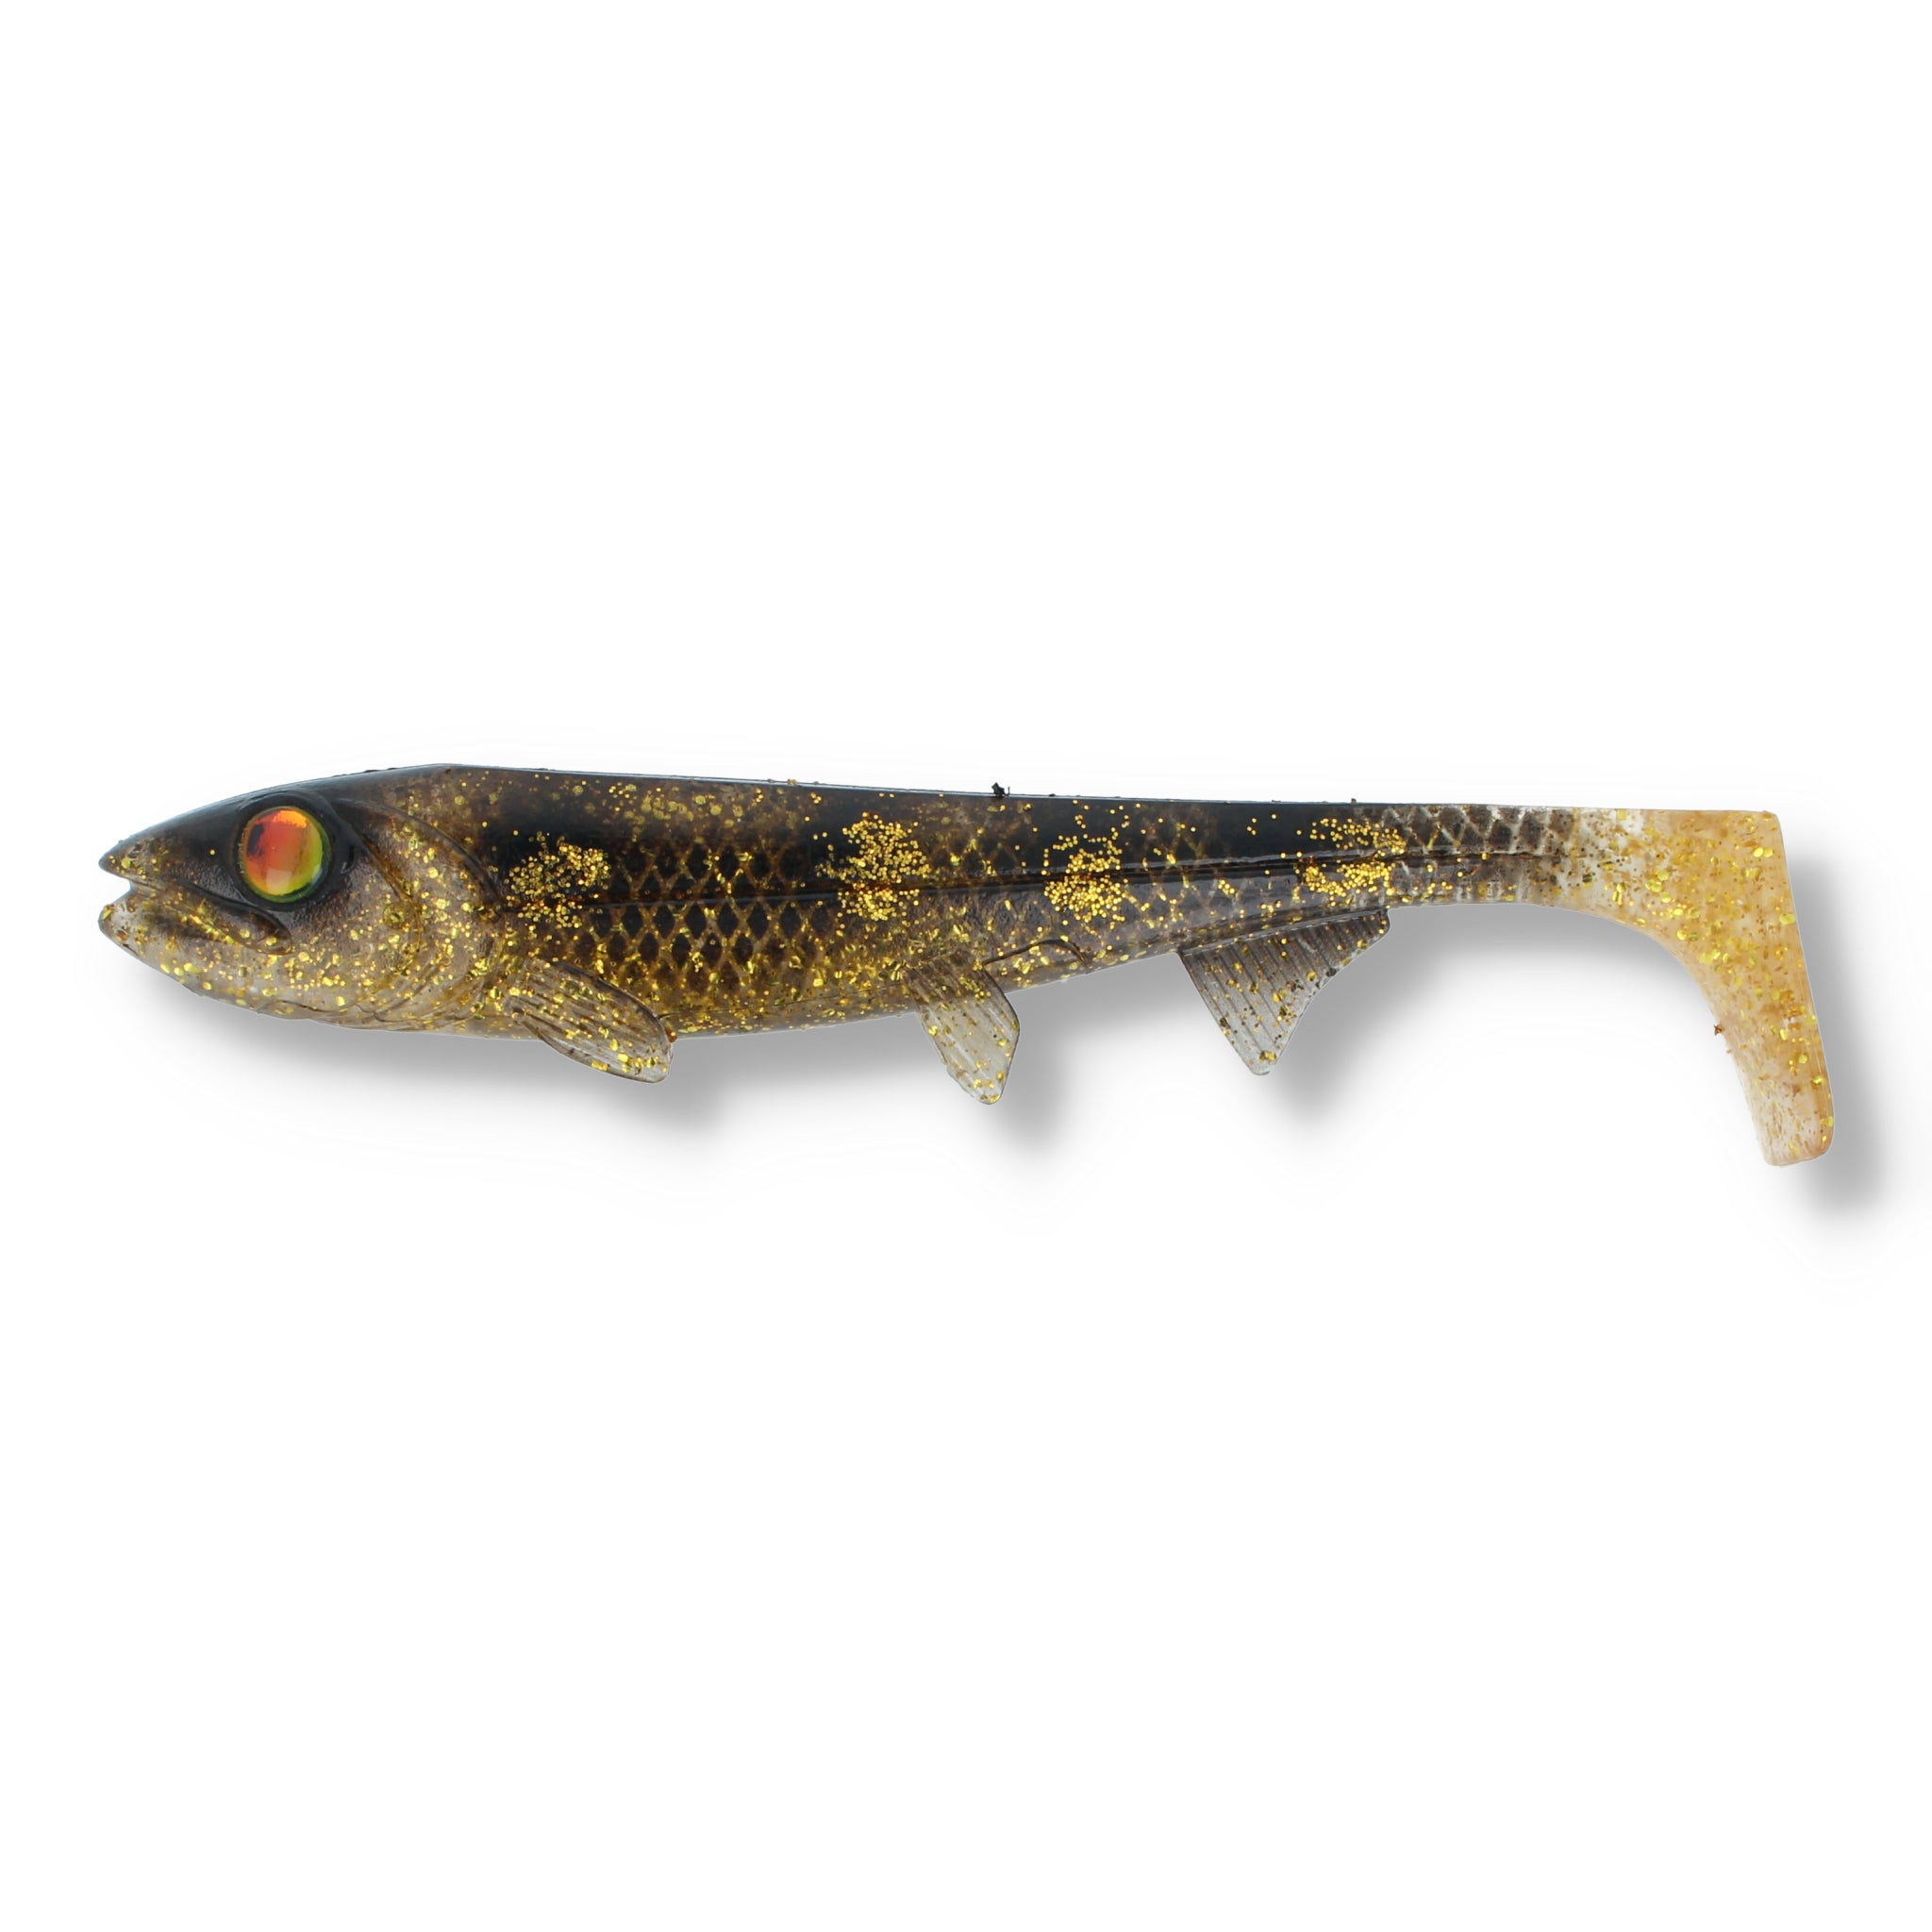 Hostagevalley Lures Shad 7"